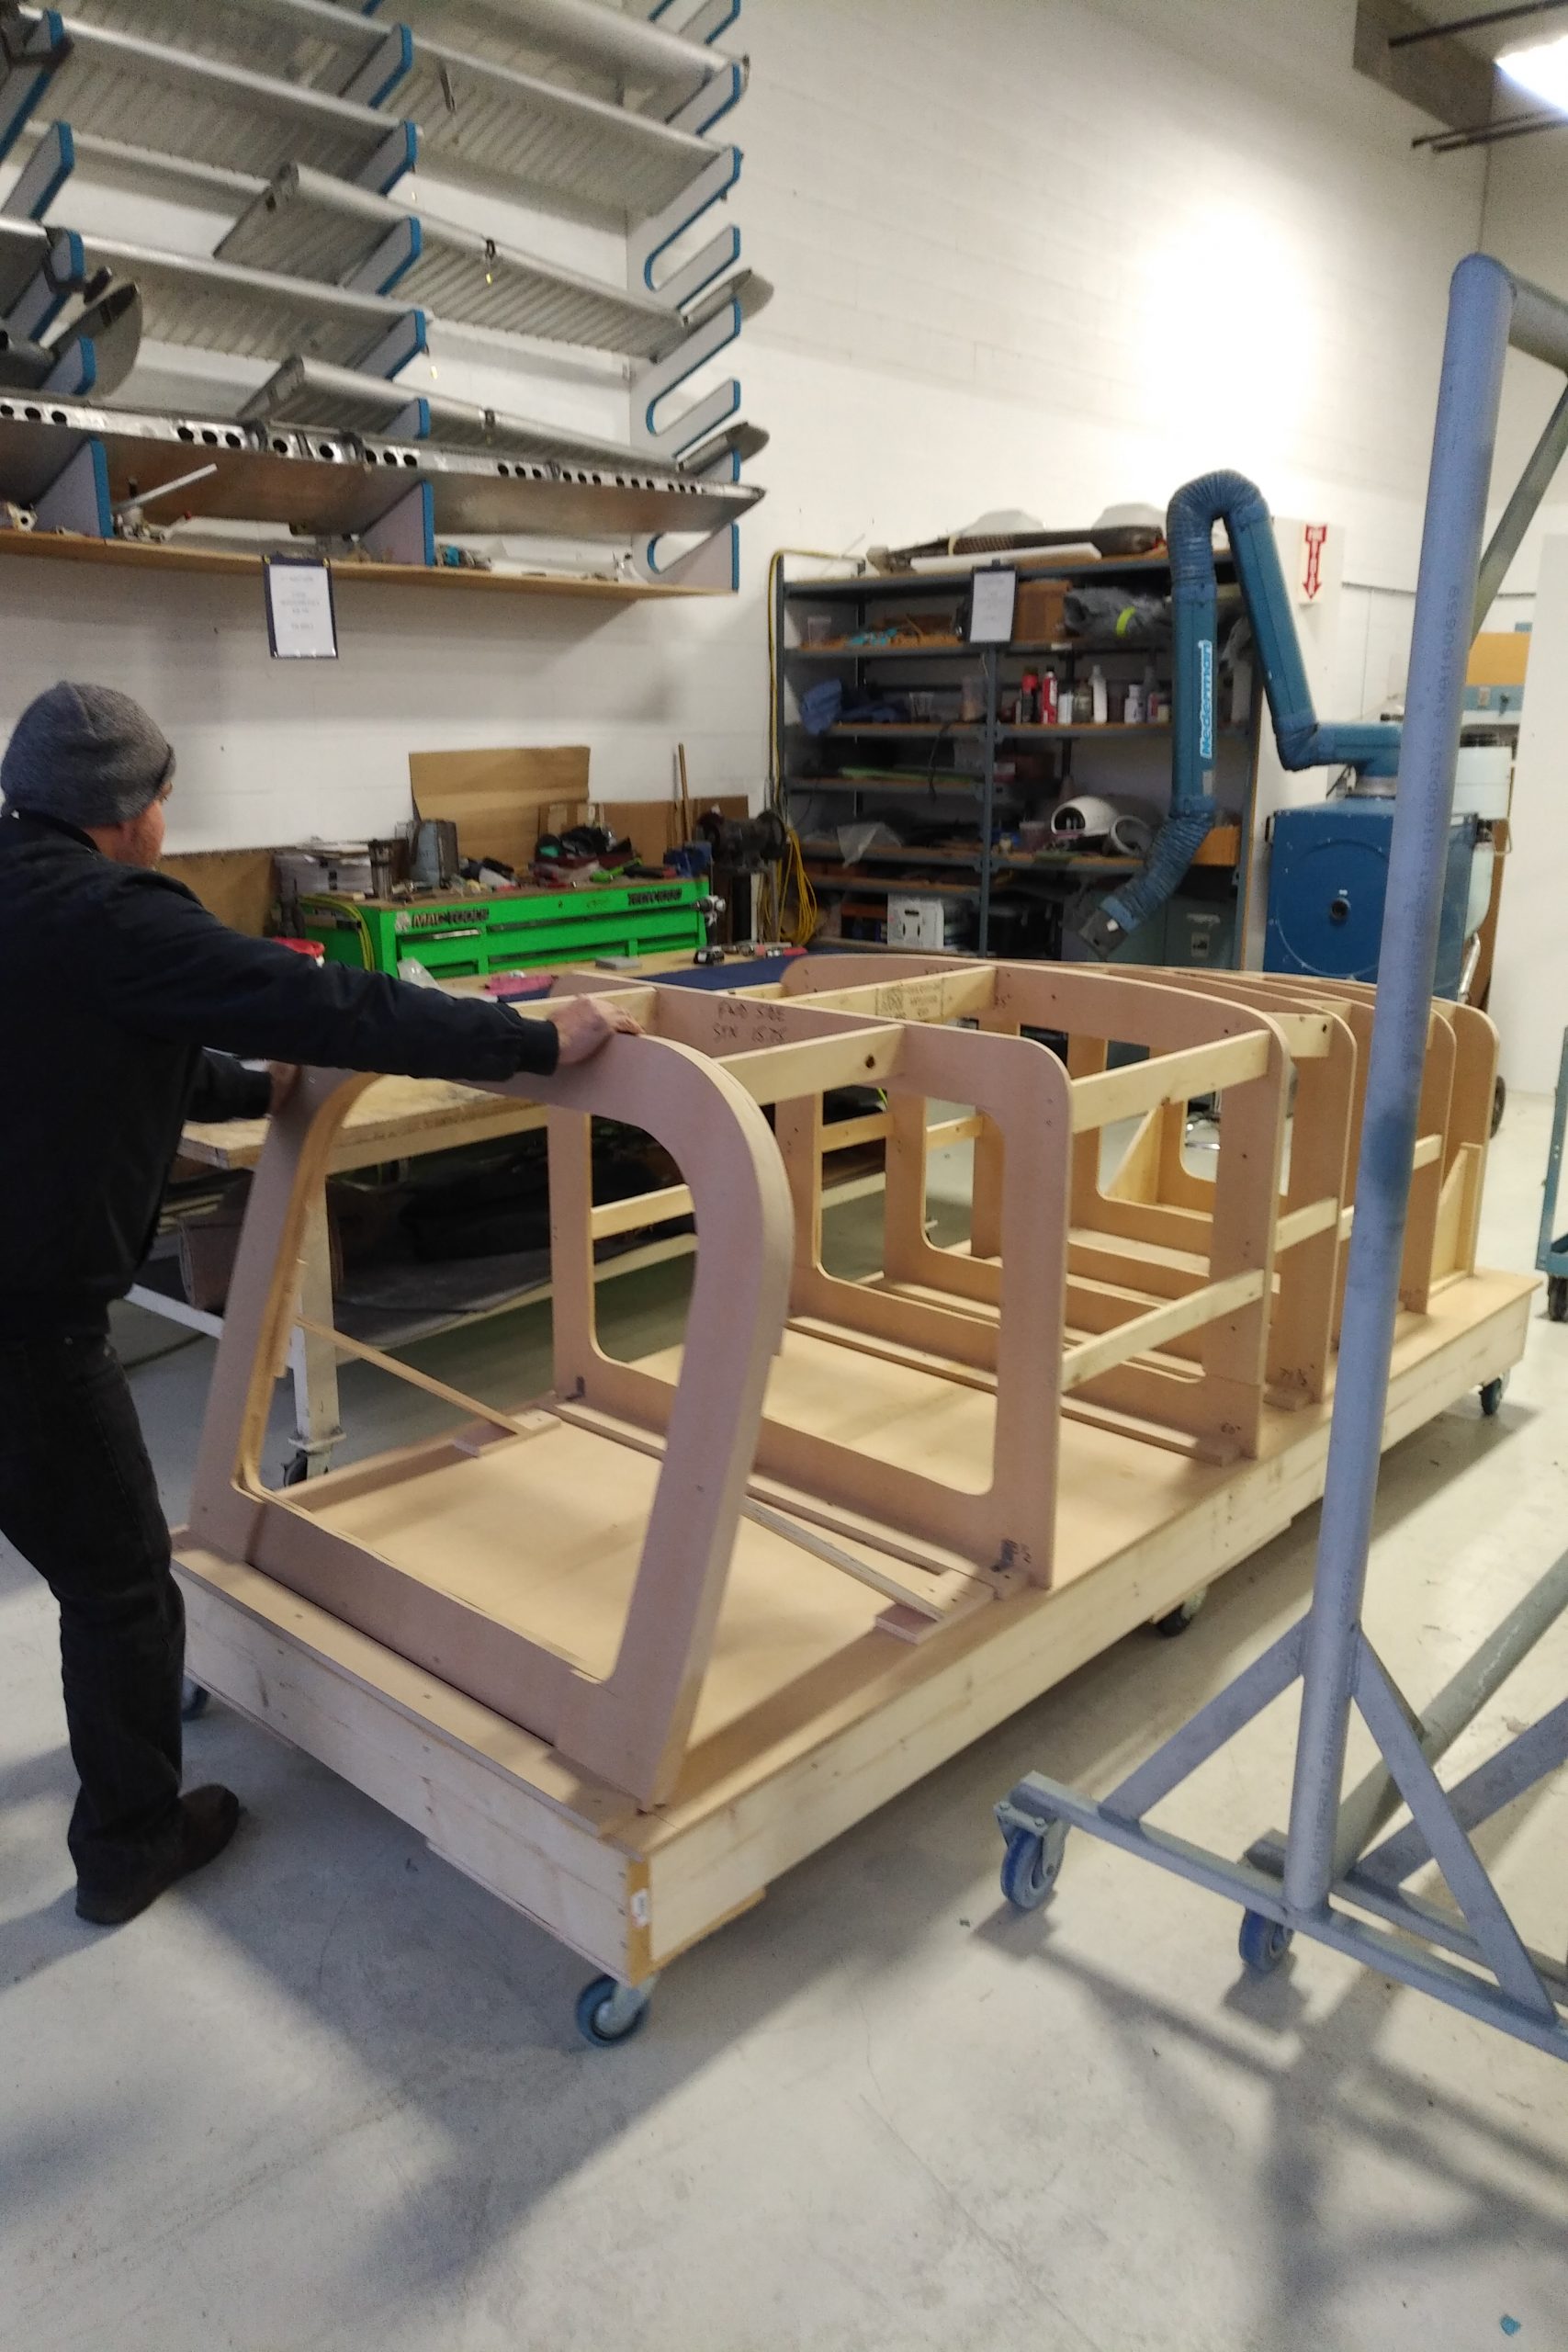 The Wooden Jig Used to Form the Custom Fibreglass Headliner/Shell